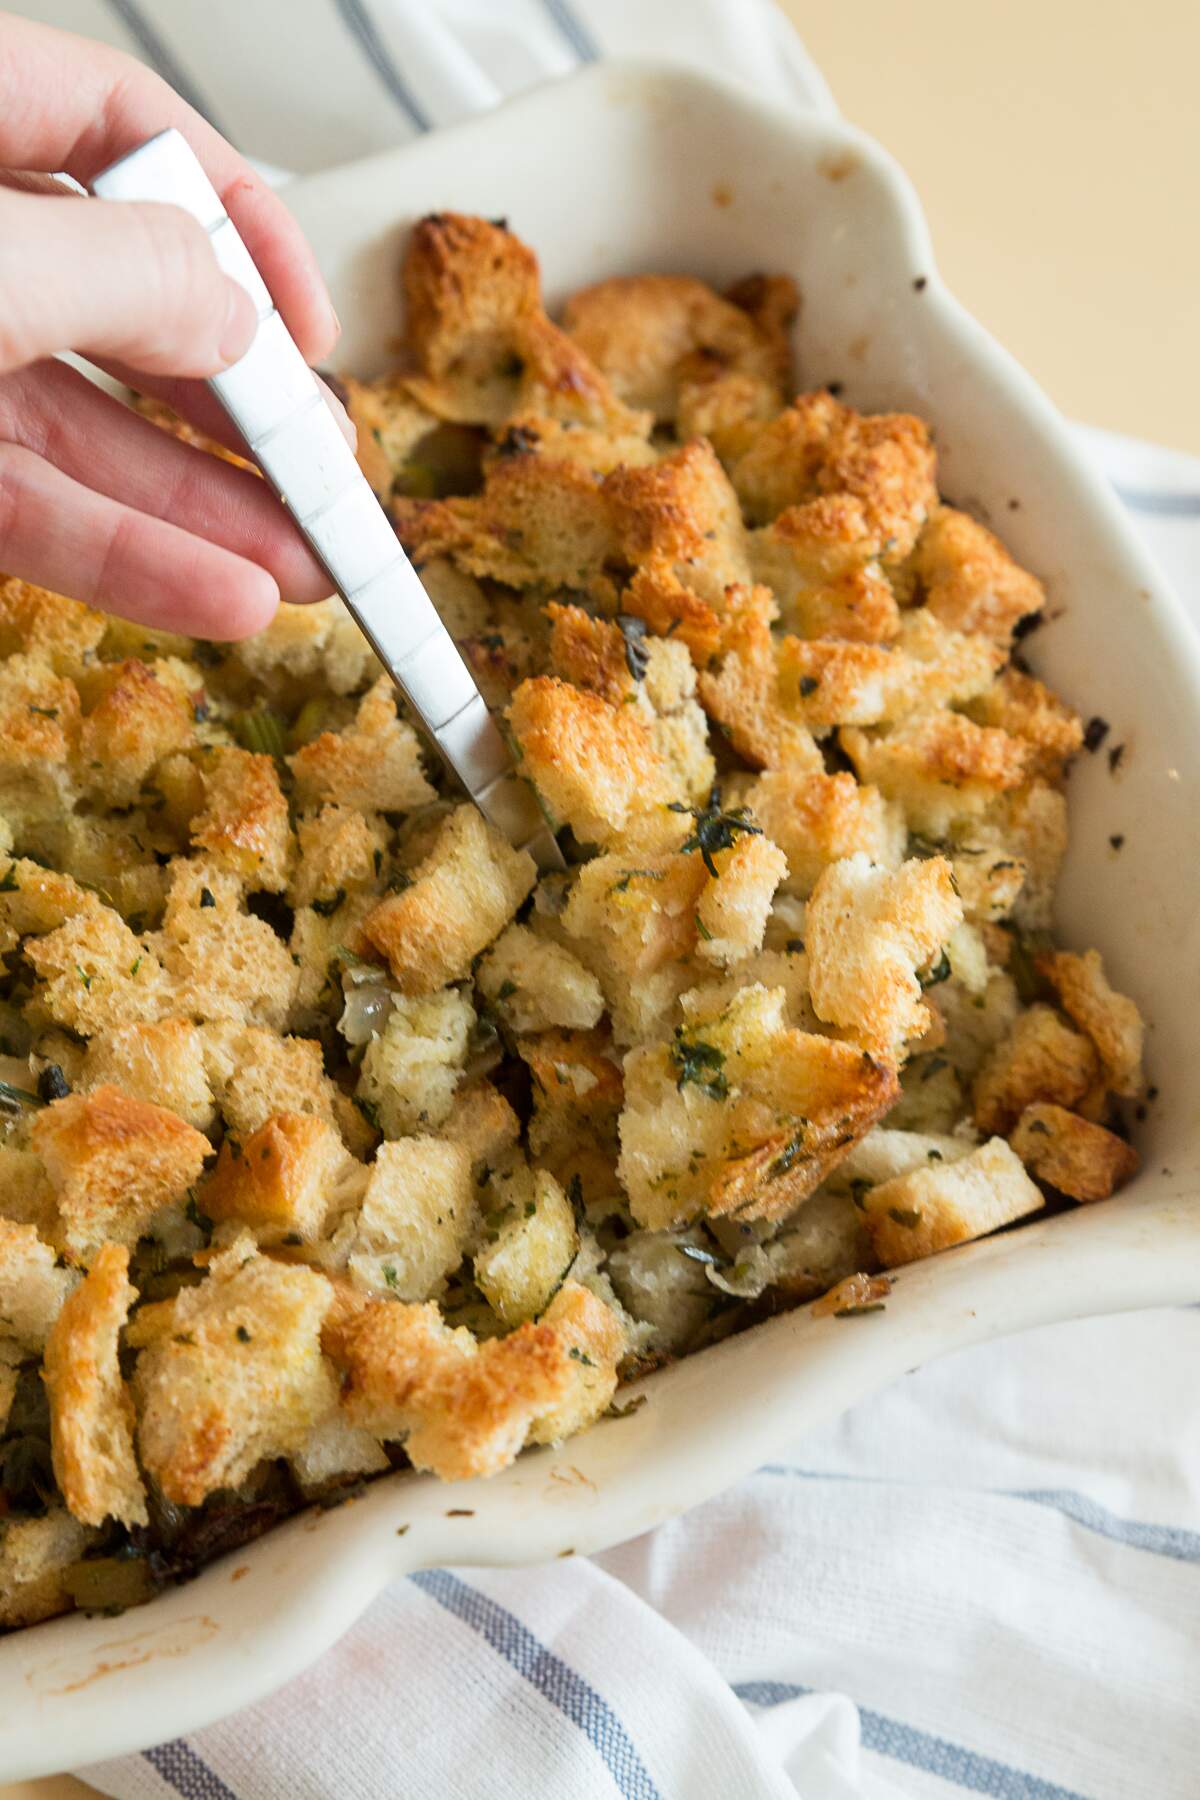 How To Doctor Up Boxed Stuffing - Boxed Stuffing Upgrade Ideas